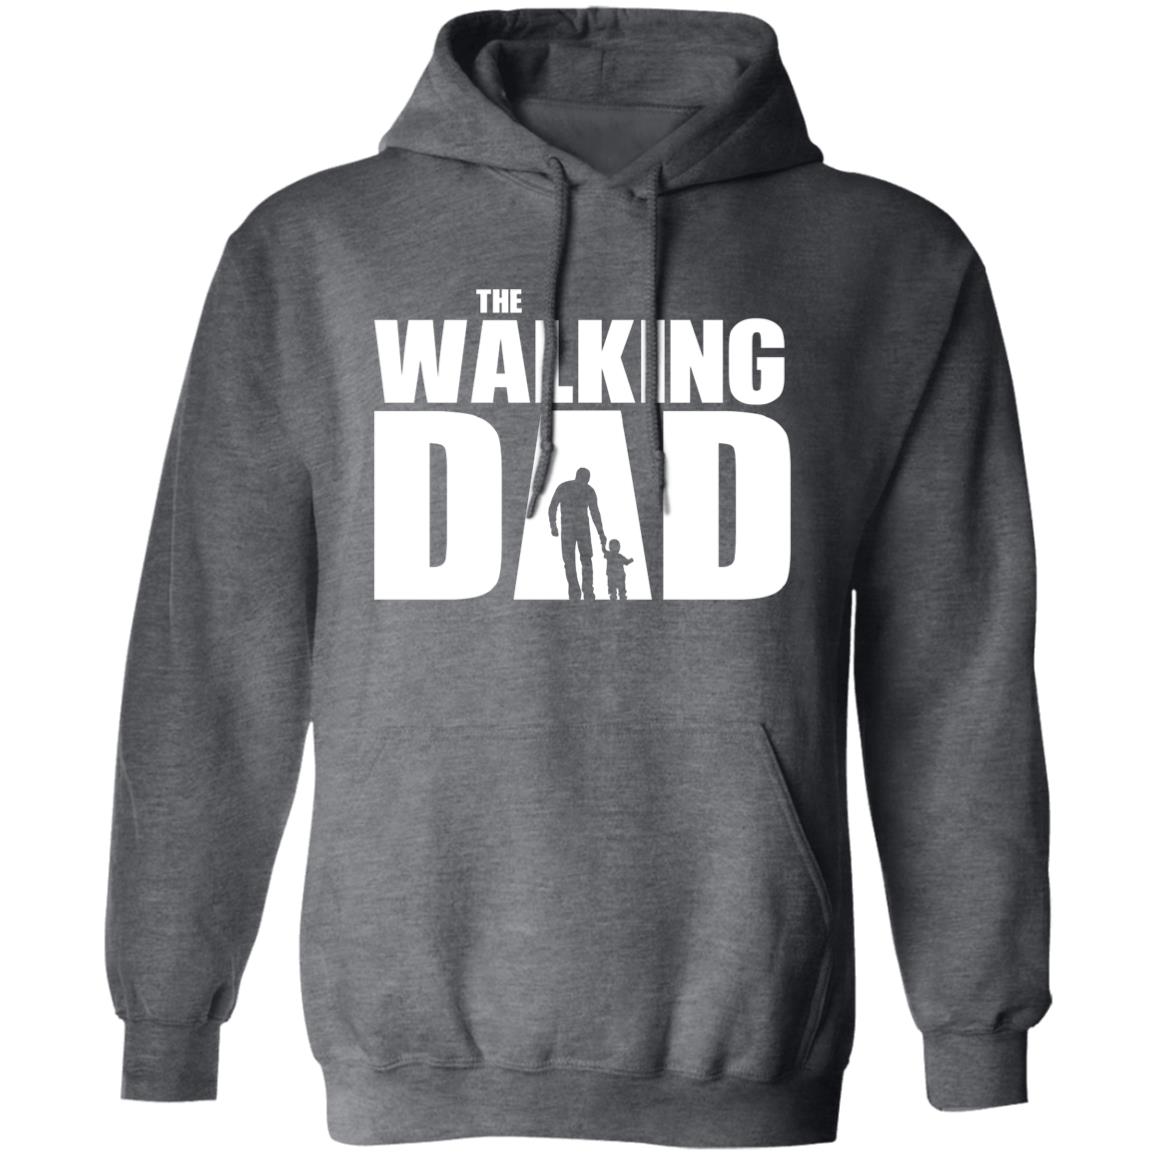 The Walking Dad of 1 in White